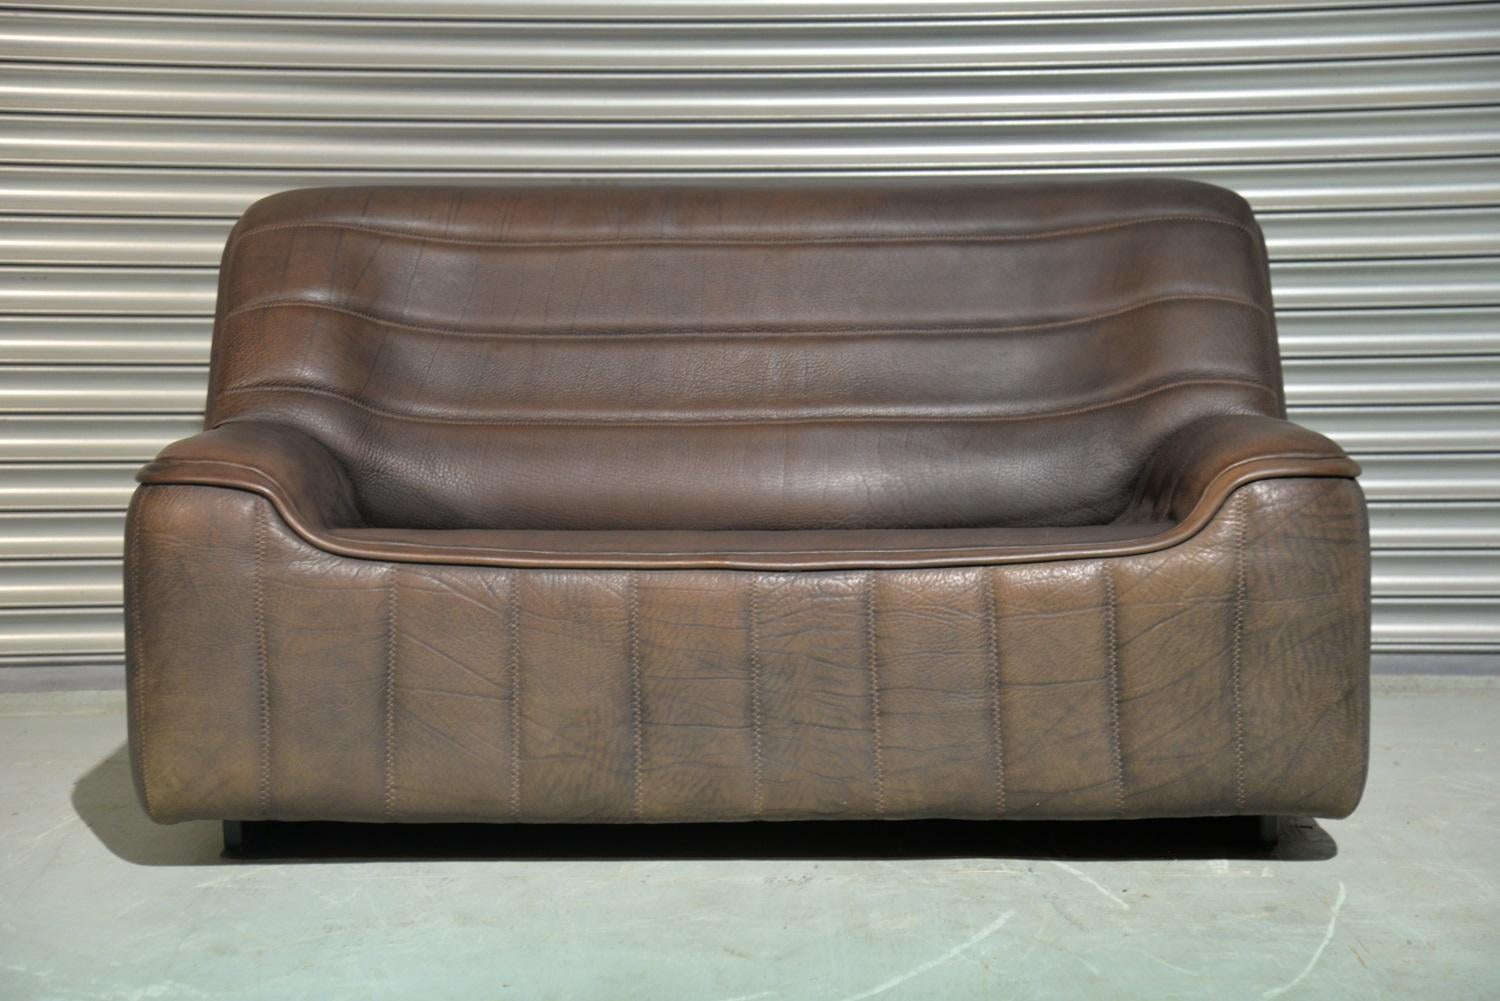 Discounted airfreight for our US and International customers ( from 2 weeks door to door )

We are delighted to bring to you an ultra rare vintage De Sede DS 84 sofa. Hand built in the 1970s by de Sede craftsman in Switzerland, this piece is